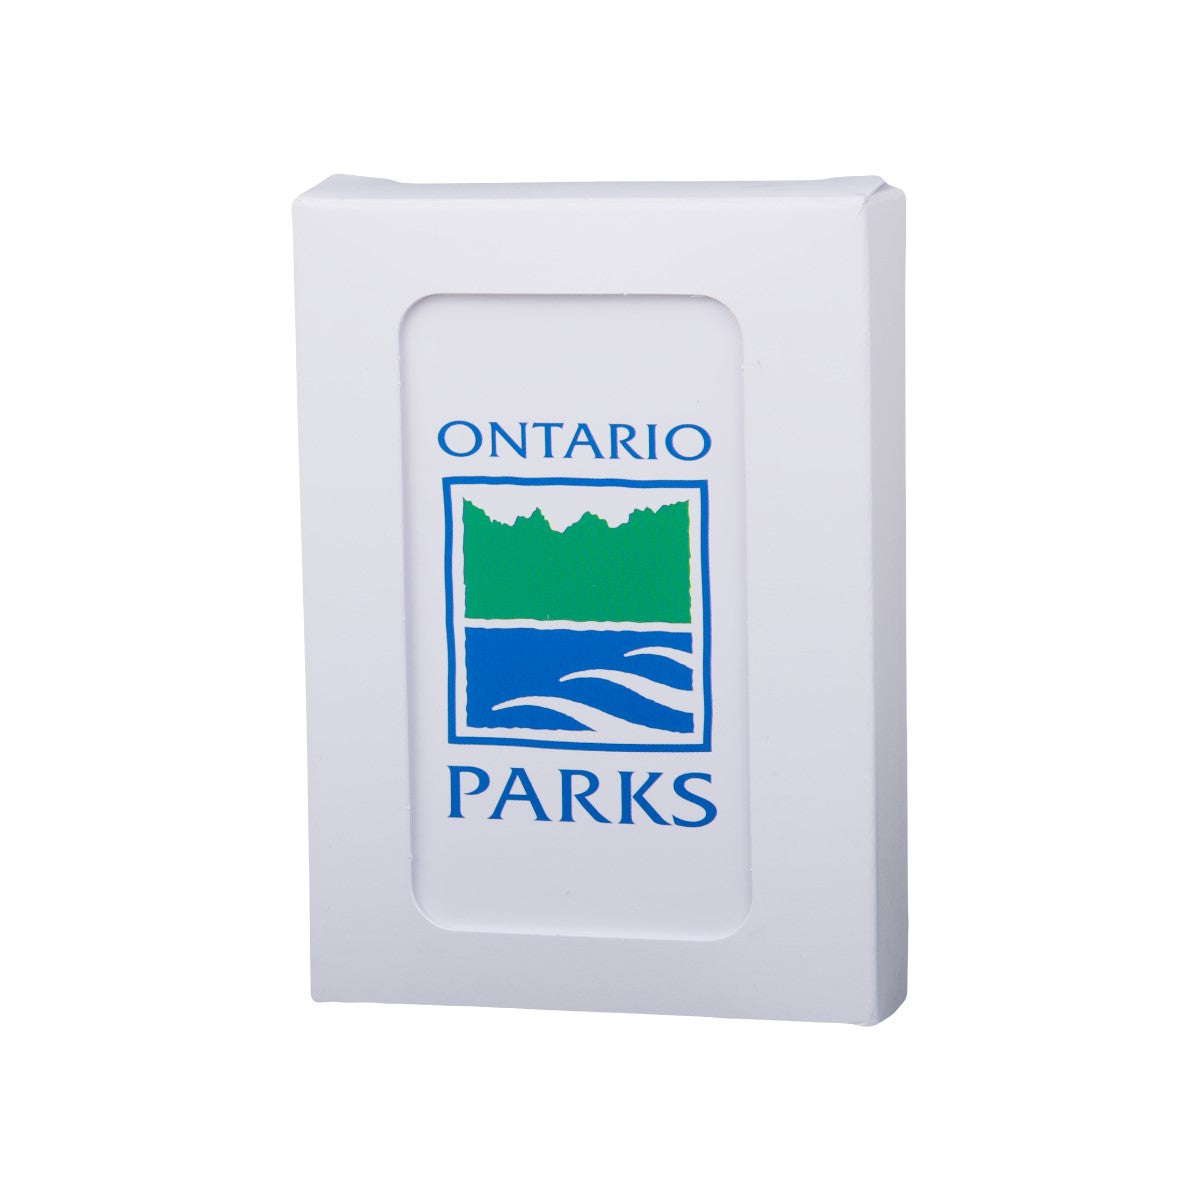 Product image of Ontario Parks Playing Cards on white background. Blue and green Ontario Parks logo in centre of white cards.